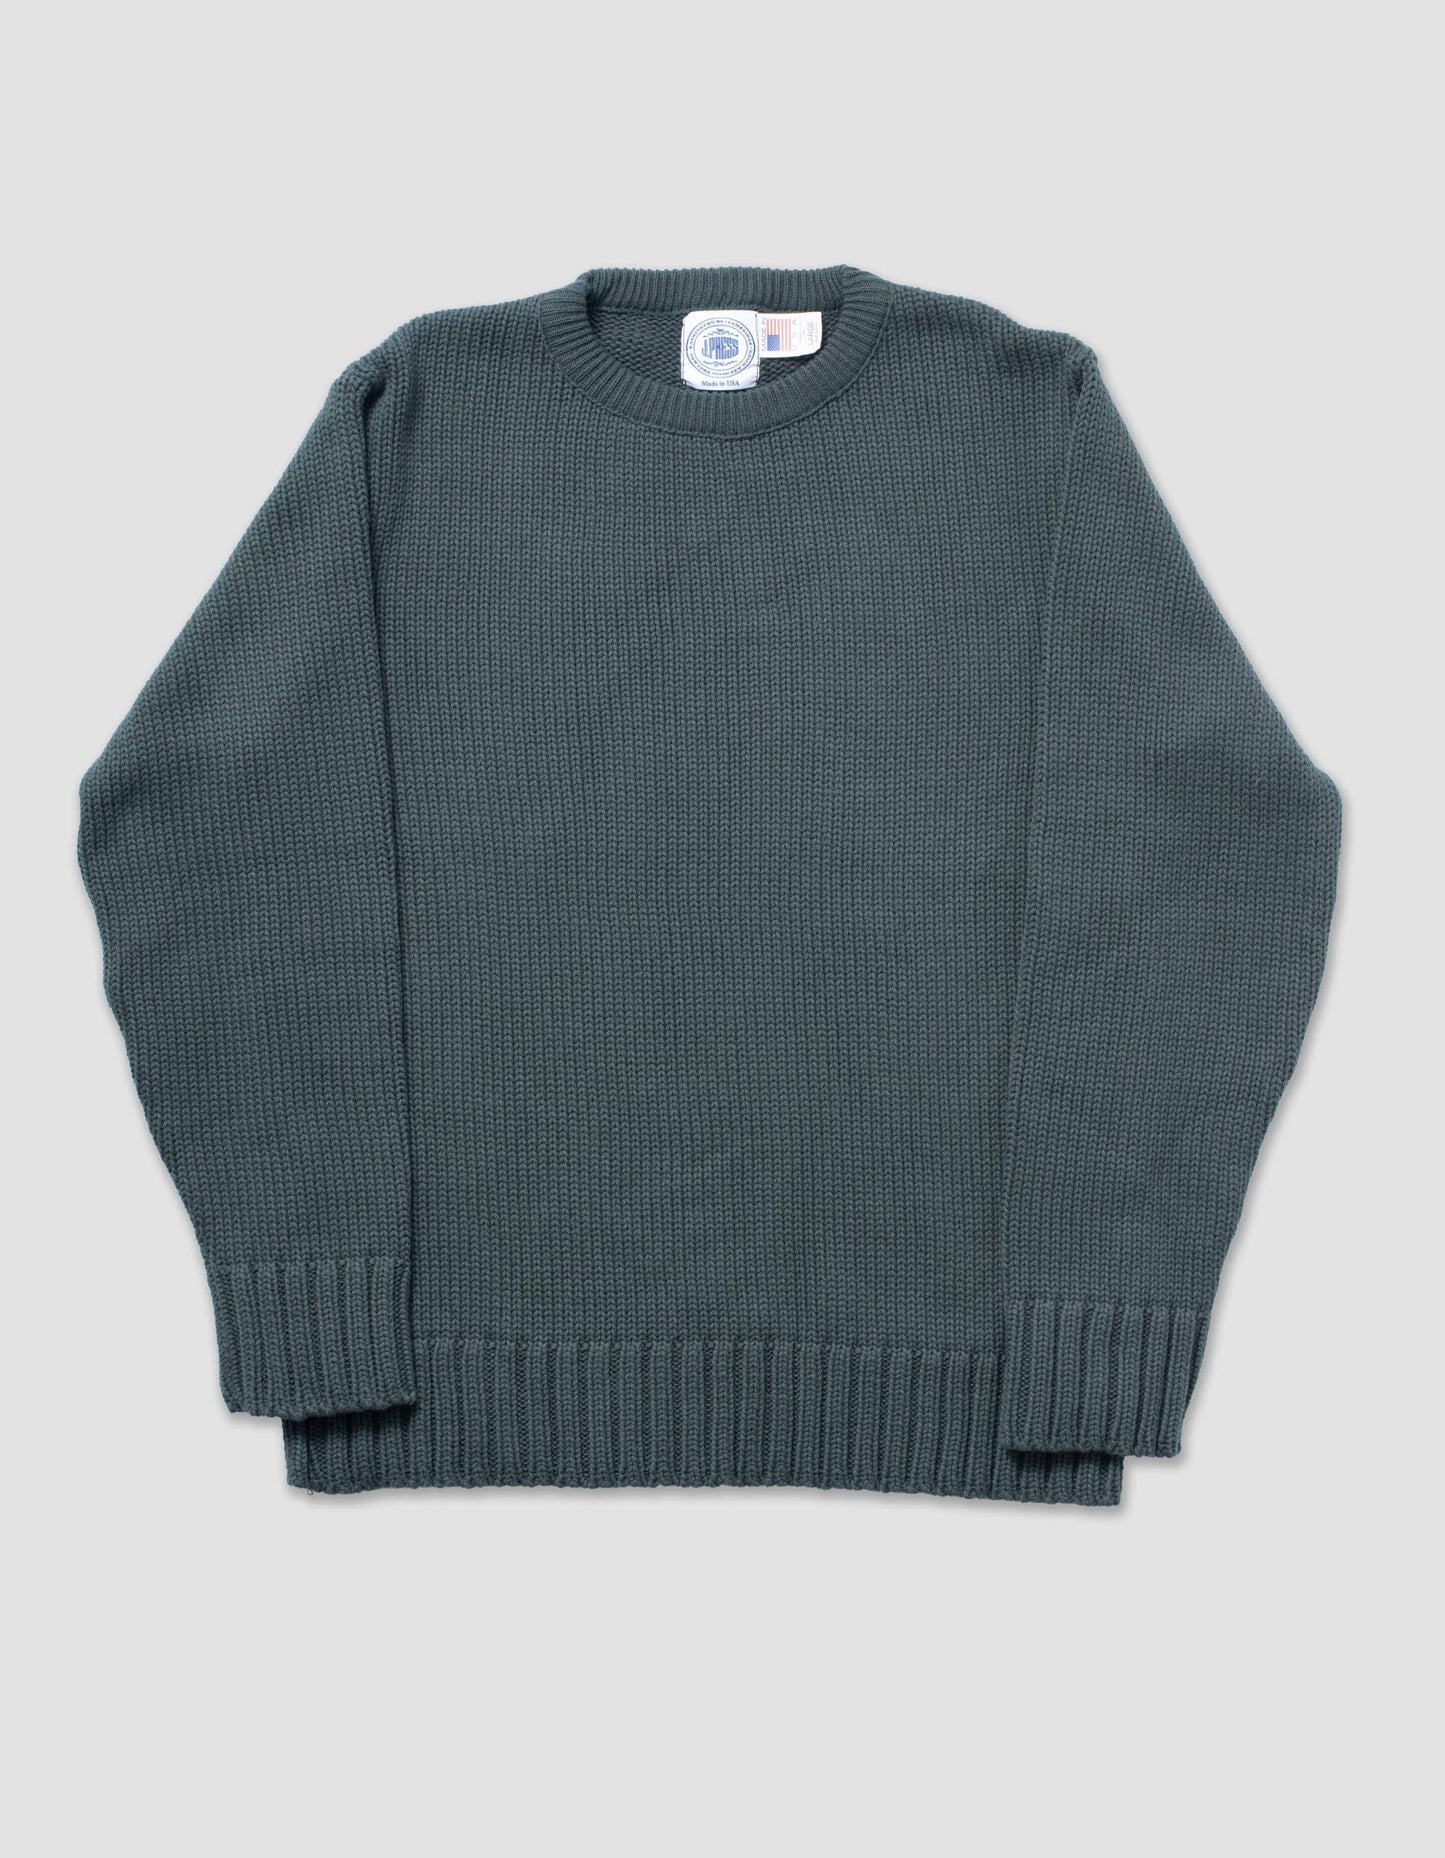 CHUNKY COTTON CREW NECK SWEATER - SPRUCE GREEN